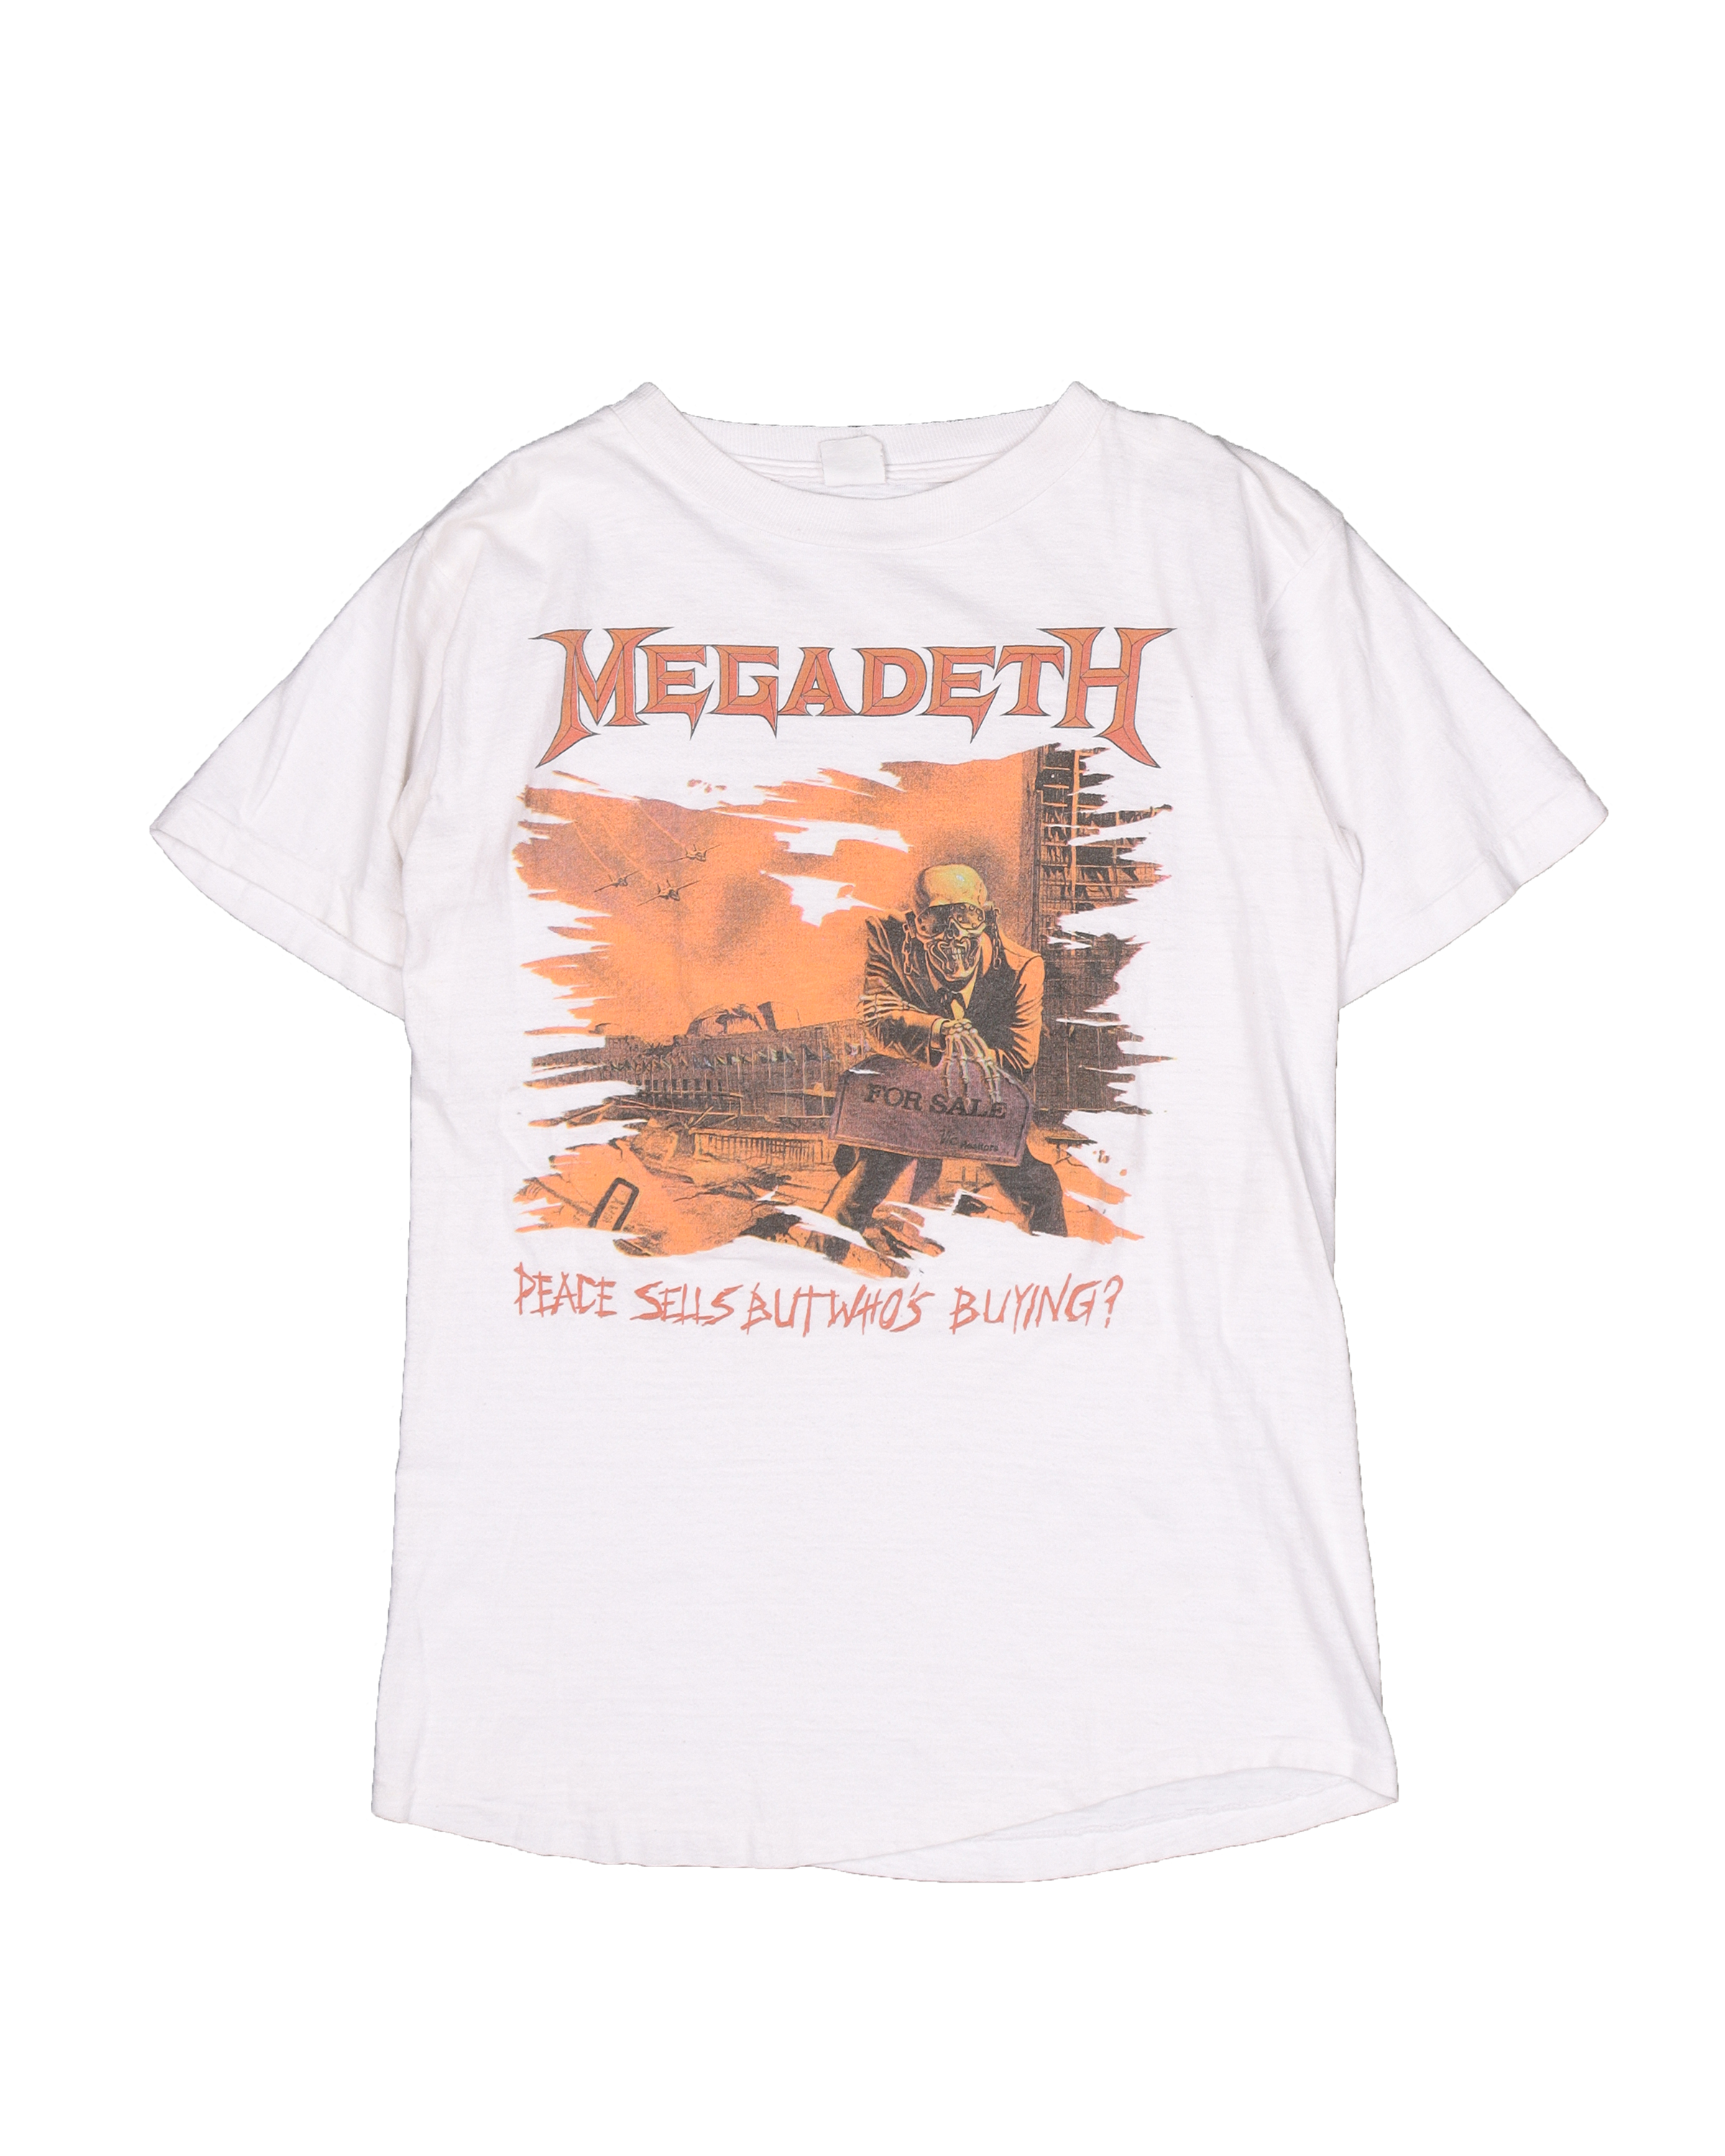 Megadeth "Peace Sells But Who's Buying?" T-Shirt